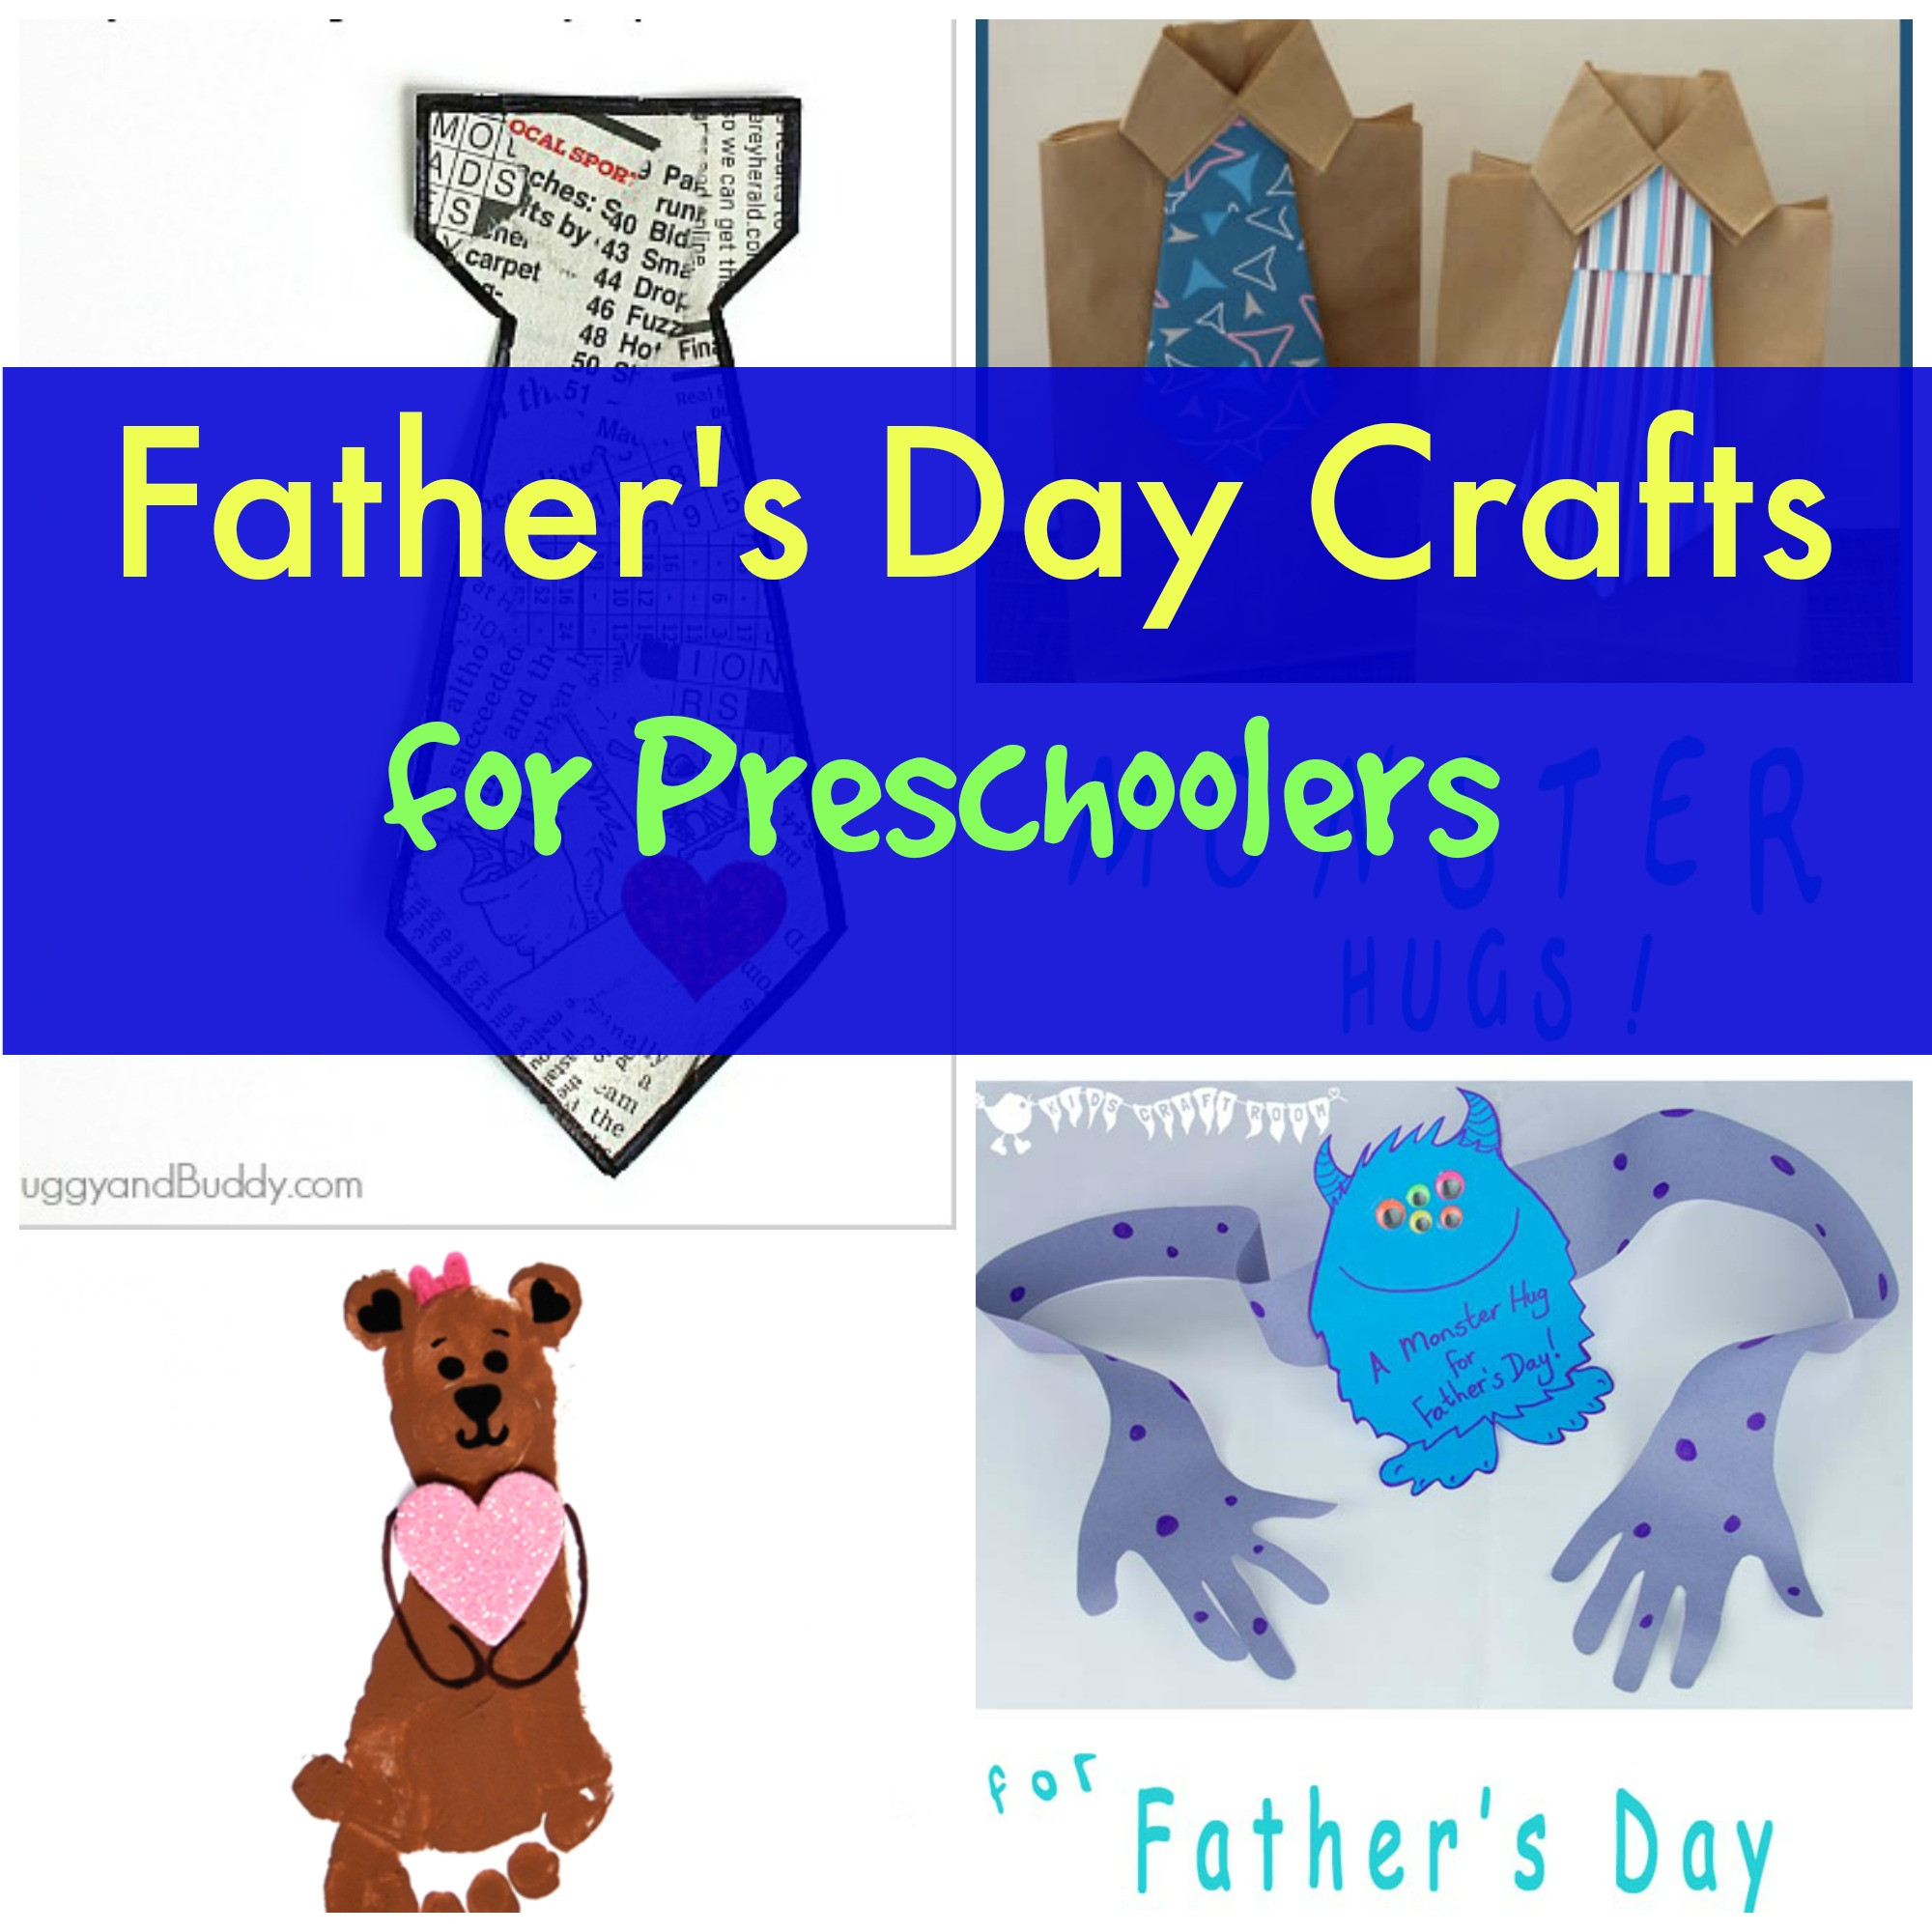 Fathers Day Crafts For Preschool
 Fathers Day Crafts for Preschoolers Make Dad smile